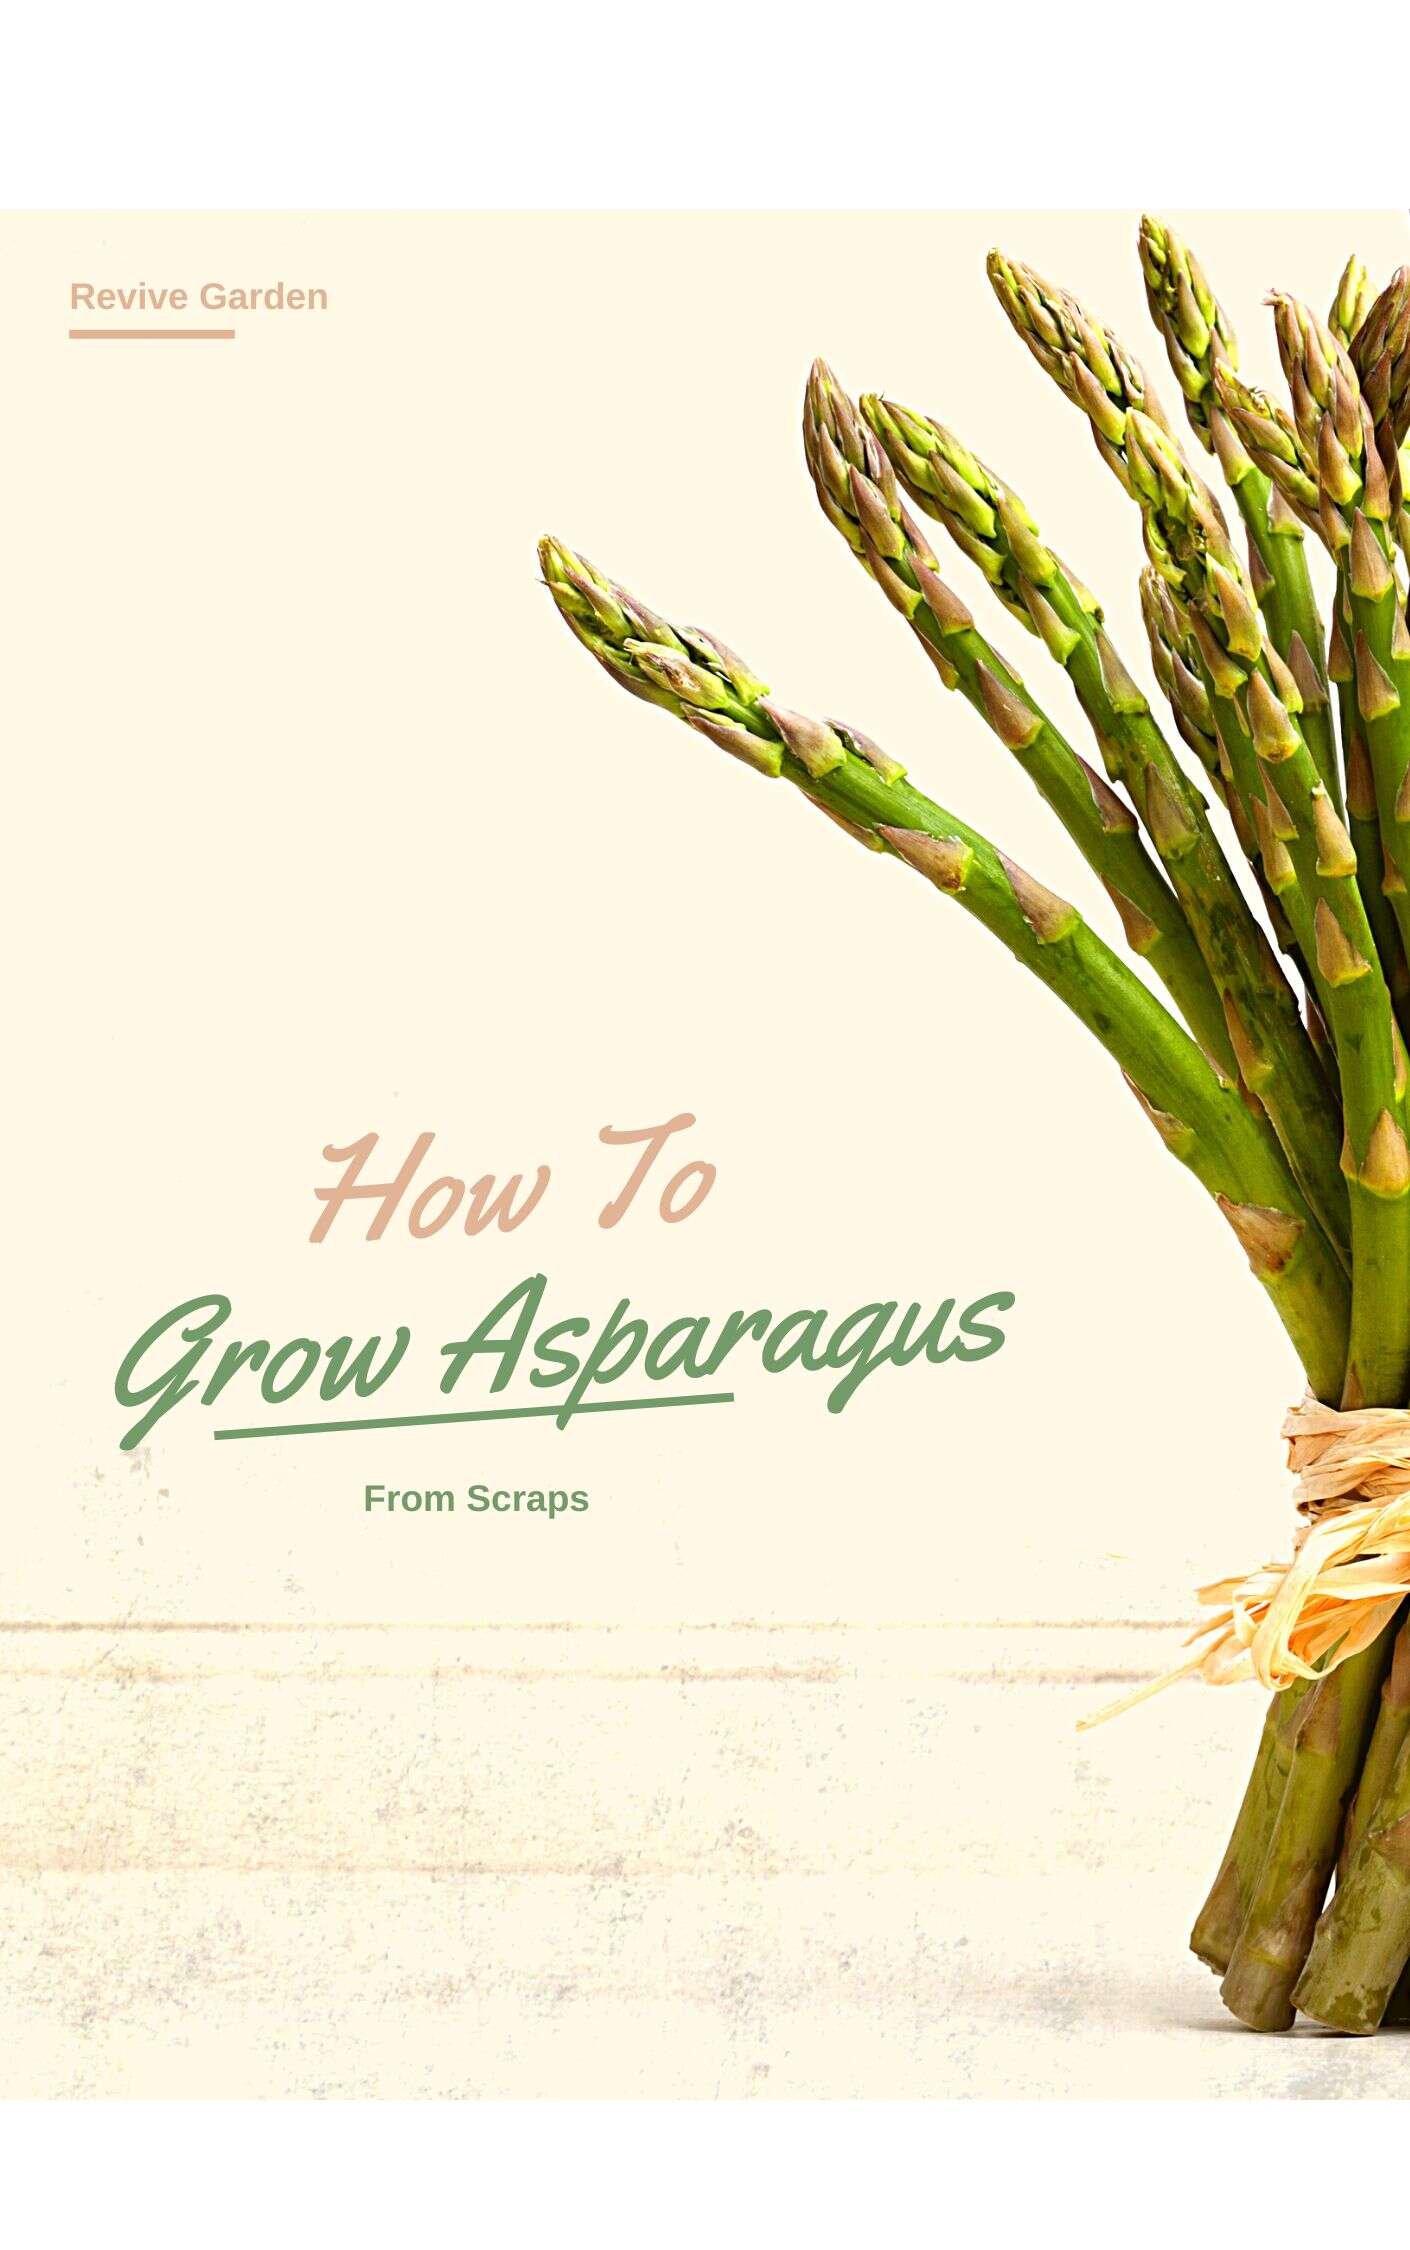 How To Grow Asparagus From Scraps